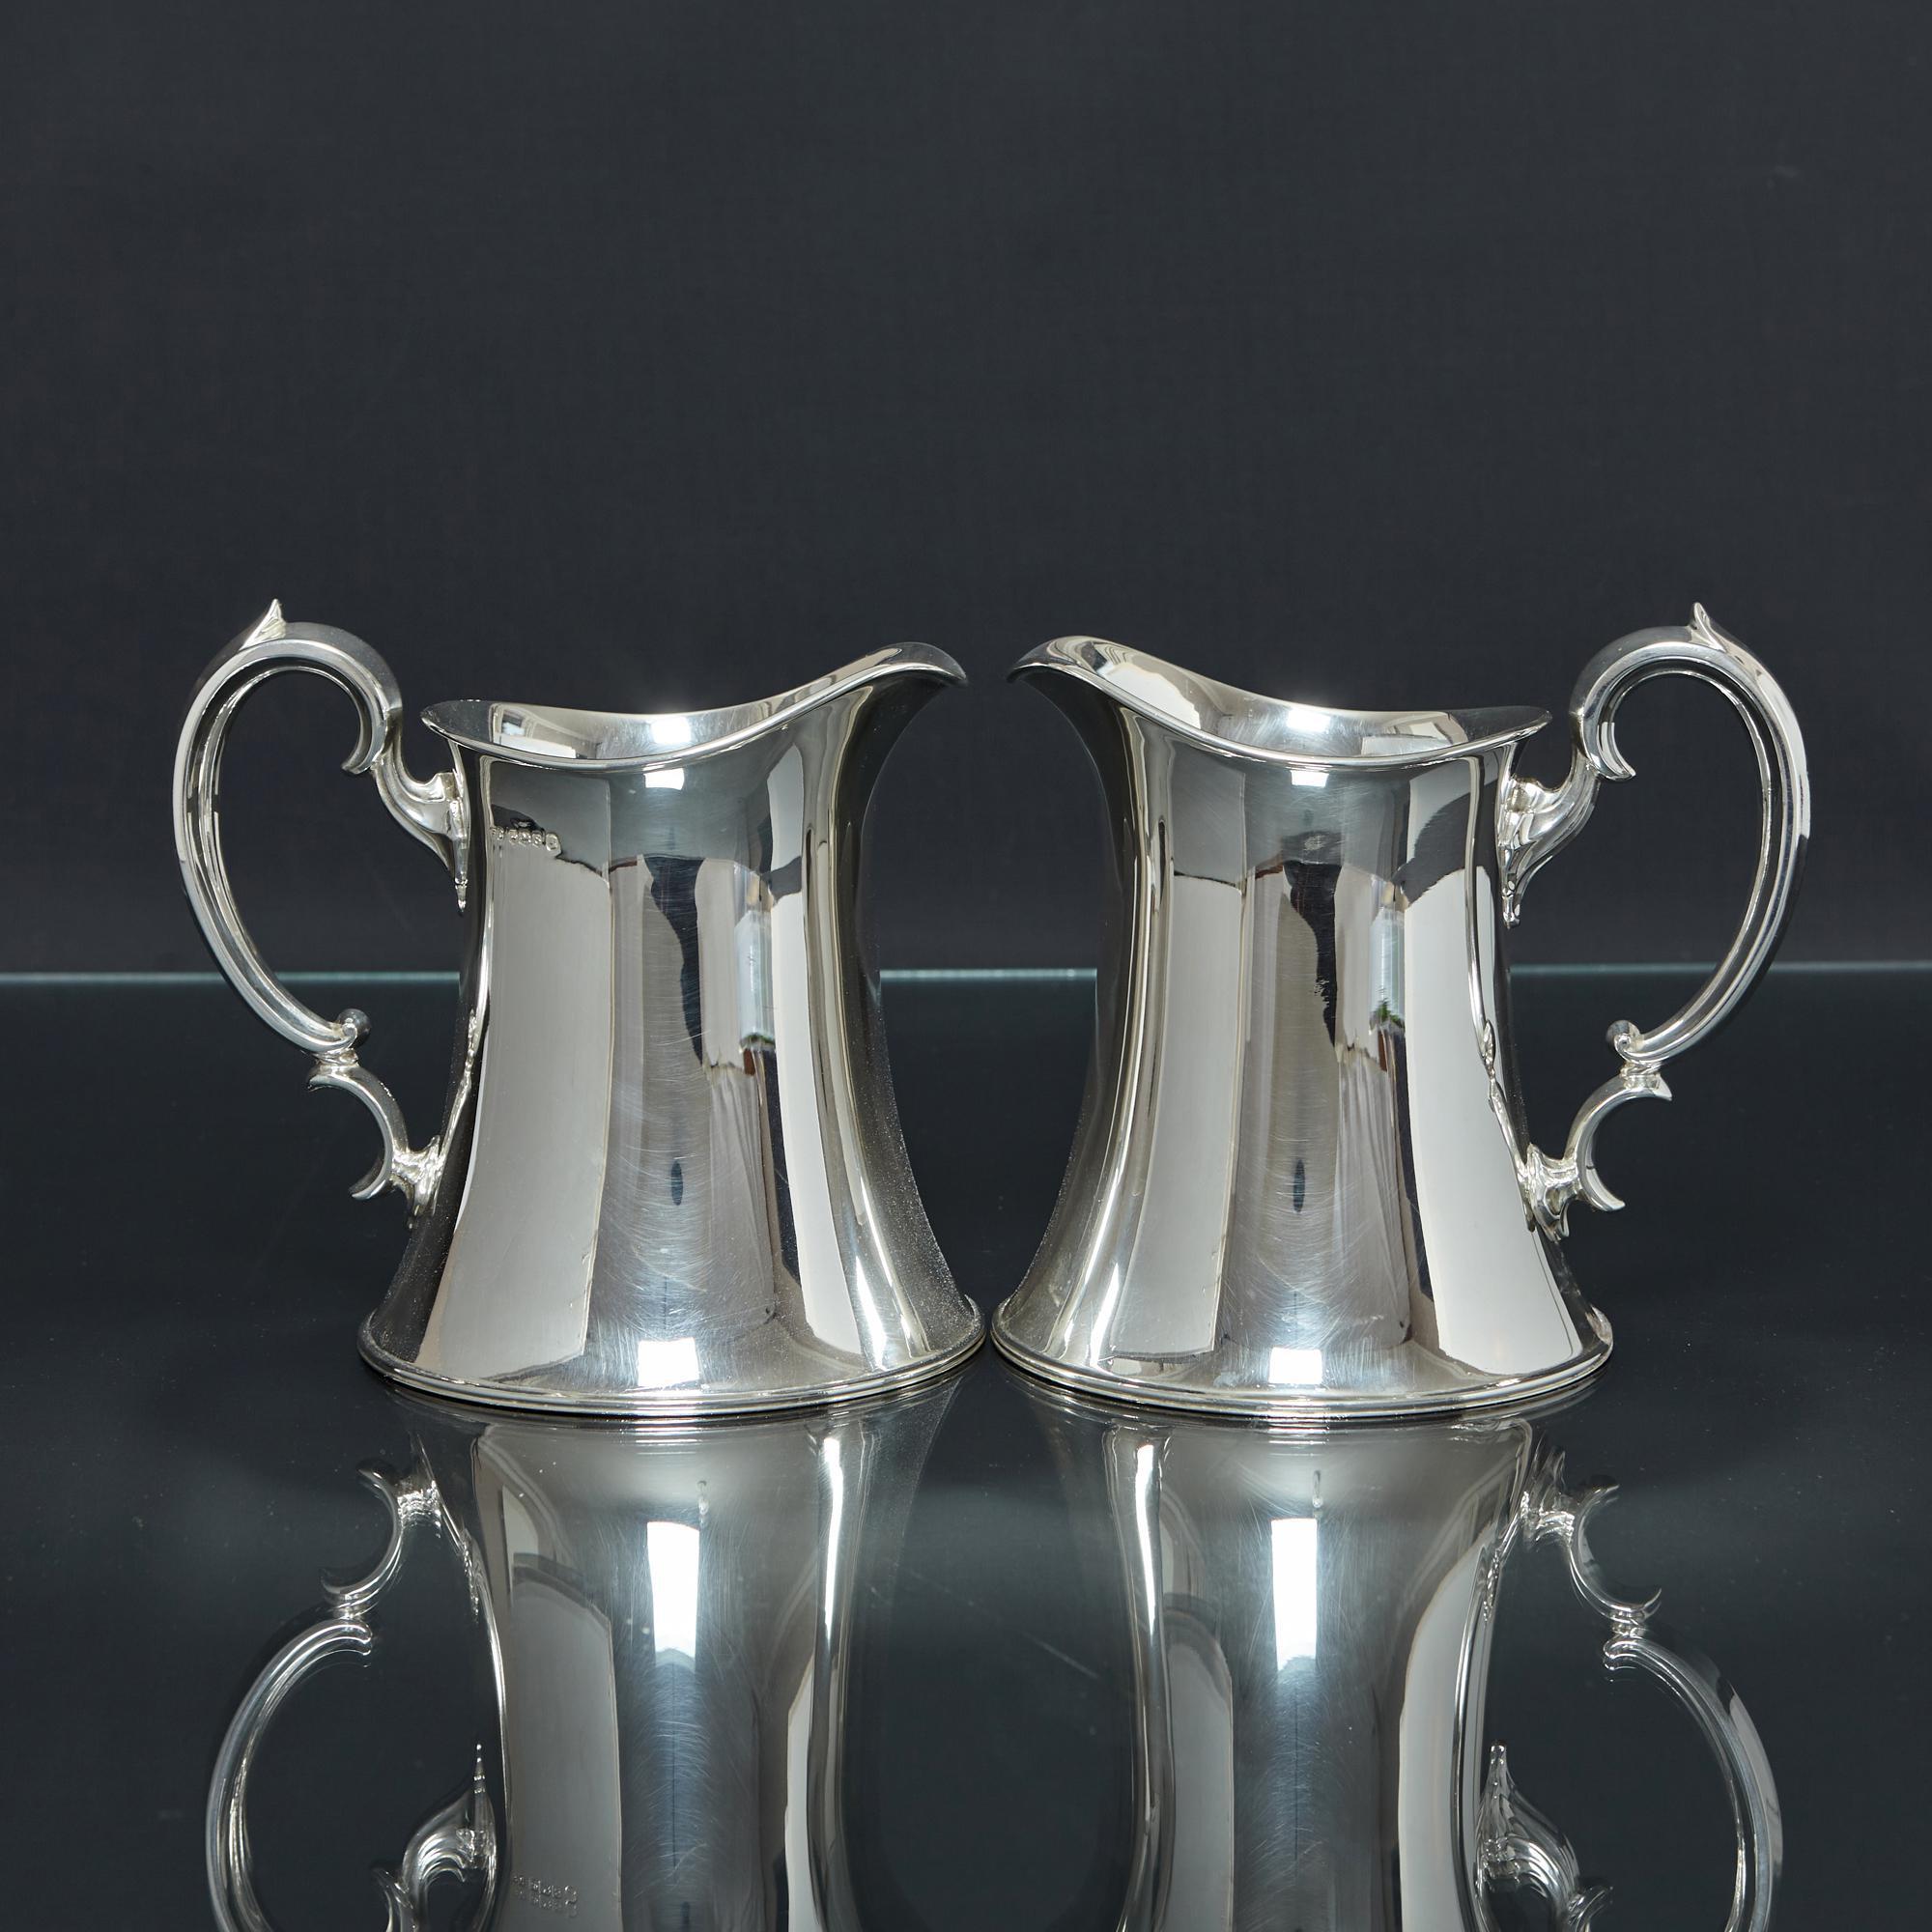 An unusual pair of Arts & Crafts style sterling silver water jugs with waisted bodies and scroll handles. Pairs of water jugs are unusual and this is a particularly stylish example that would complement both traditional and contemporary table